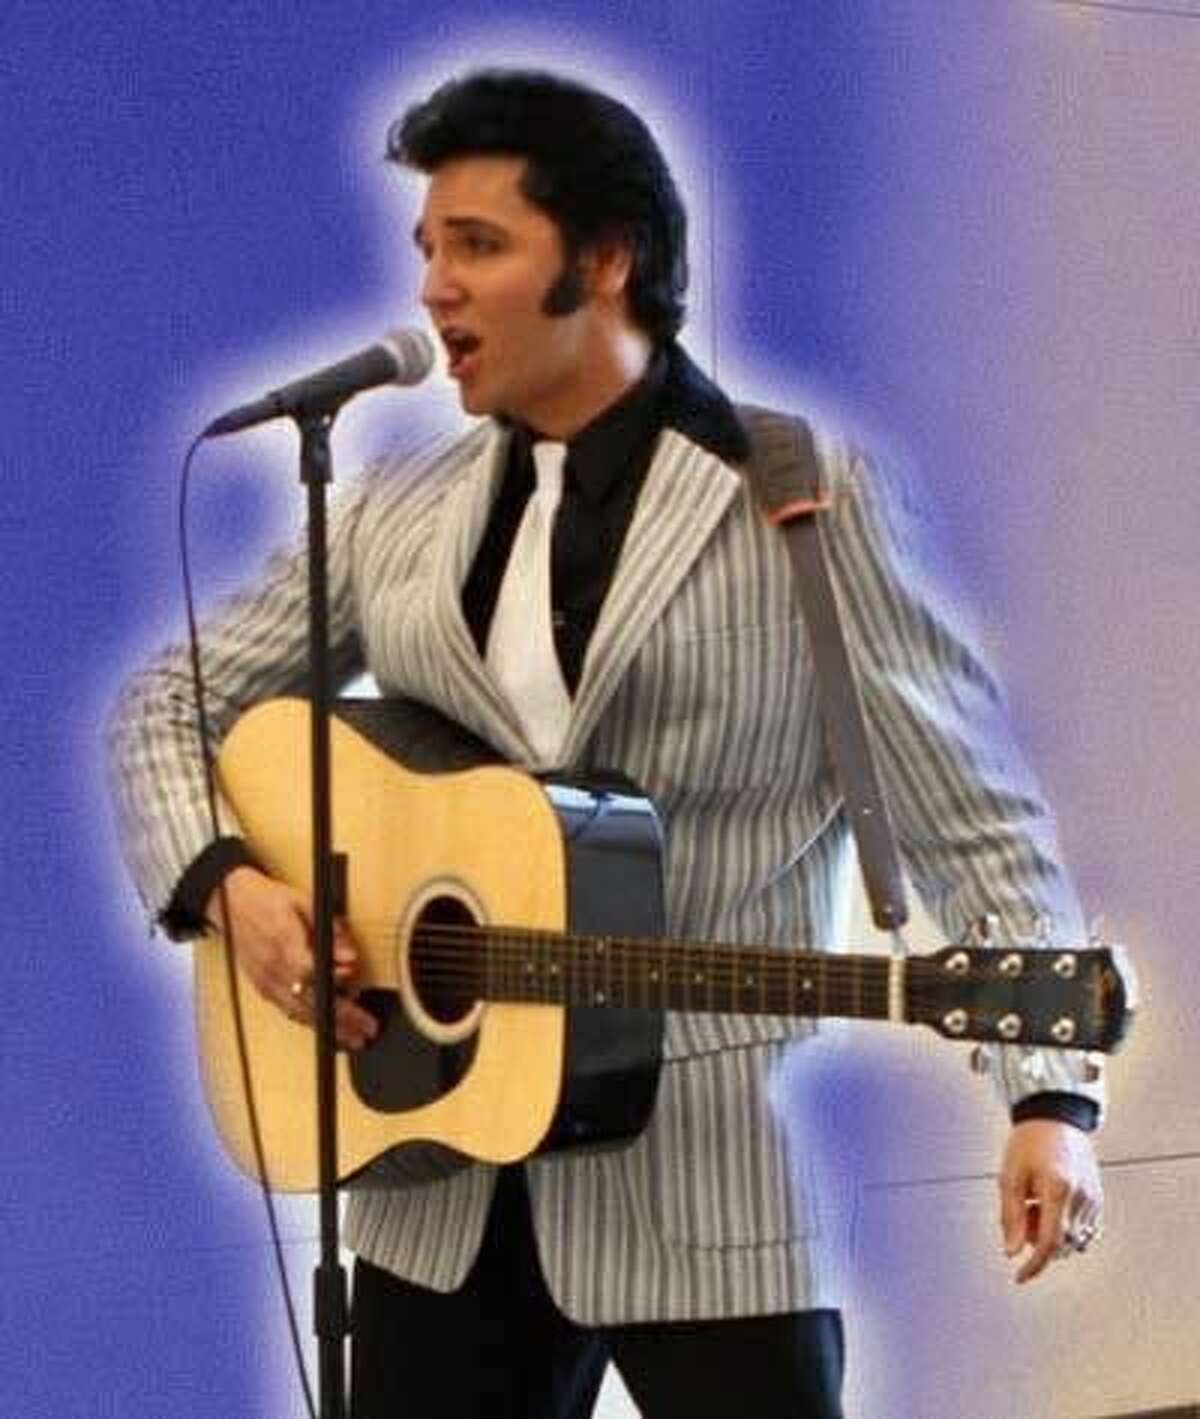 Donny Edwards, one of the most sought-after Elvis tribute artist in the world, returns to the Crighton Theatre for a show March 28 at 7 p.m. Edwards will take the audience through the early years and Elvis’ 70s concert era! Special guest Wayne King will open with his set of golden oldies and also perform his tribute to Roy Orbison. Both entertainers will be fronted by the eight-member band Fever. Call the Crighton Theatre at 936-441-7469 or visit www.crightontheatre.org to purchase tickets.